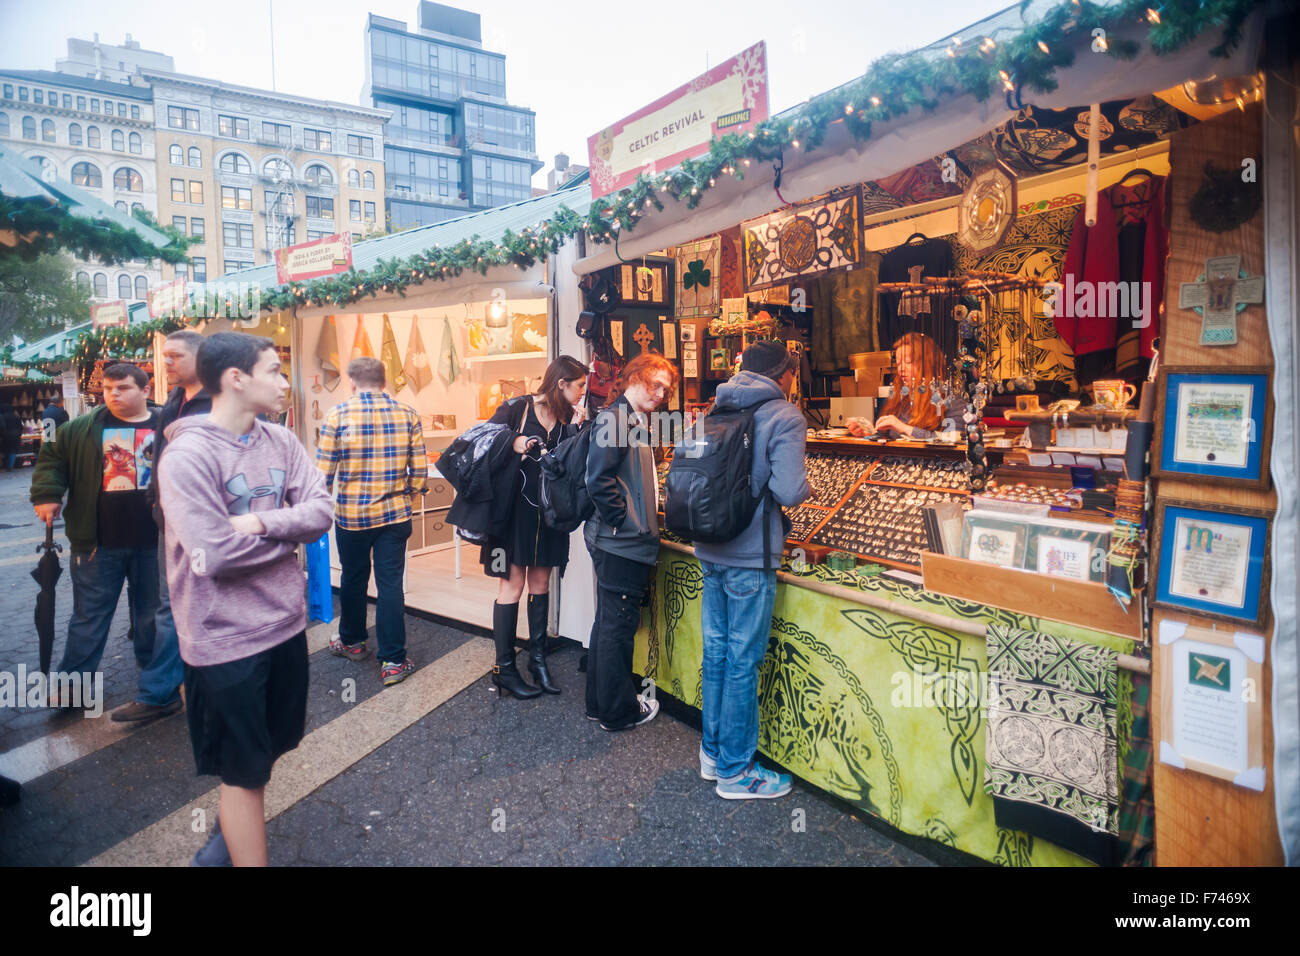 Shoppers browse the Union Square Holiday Market in New York on a rainy opening day, Thursday, November 19, 2015. 150 vendors, including a 'Made in Brooklyn' section, sell their holiday wares at the market, now in it's 22nd year. The market will remain open daily, closing on December 24.  (© Richard B. Levine) Stock Photo